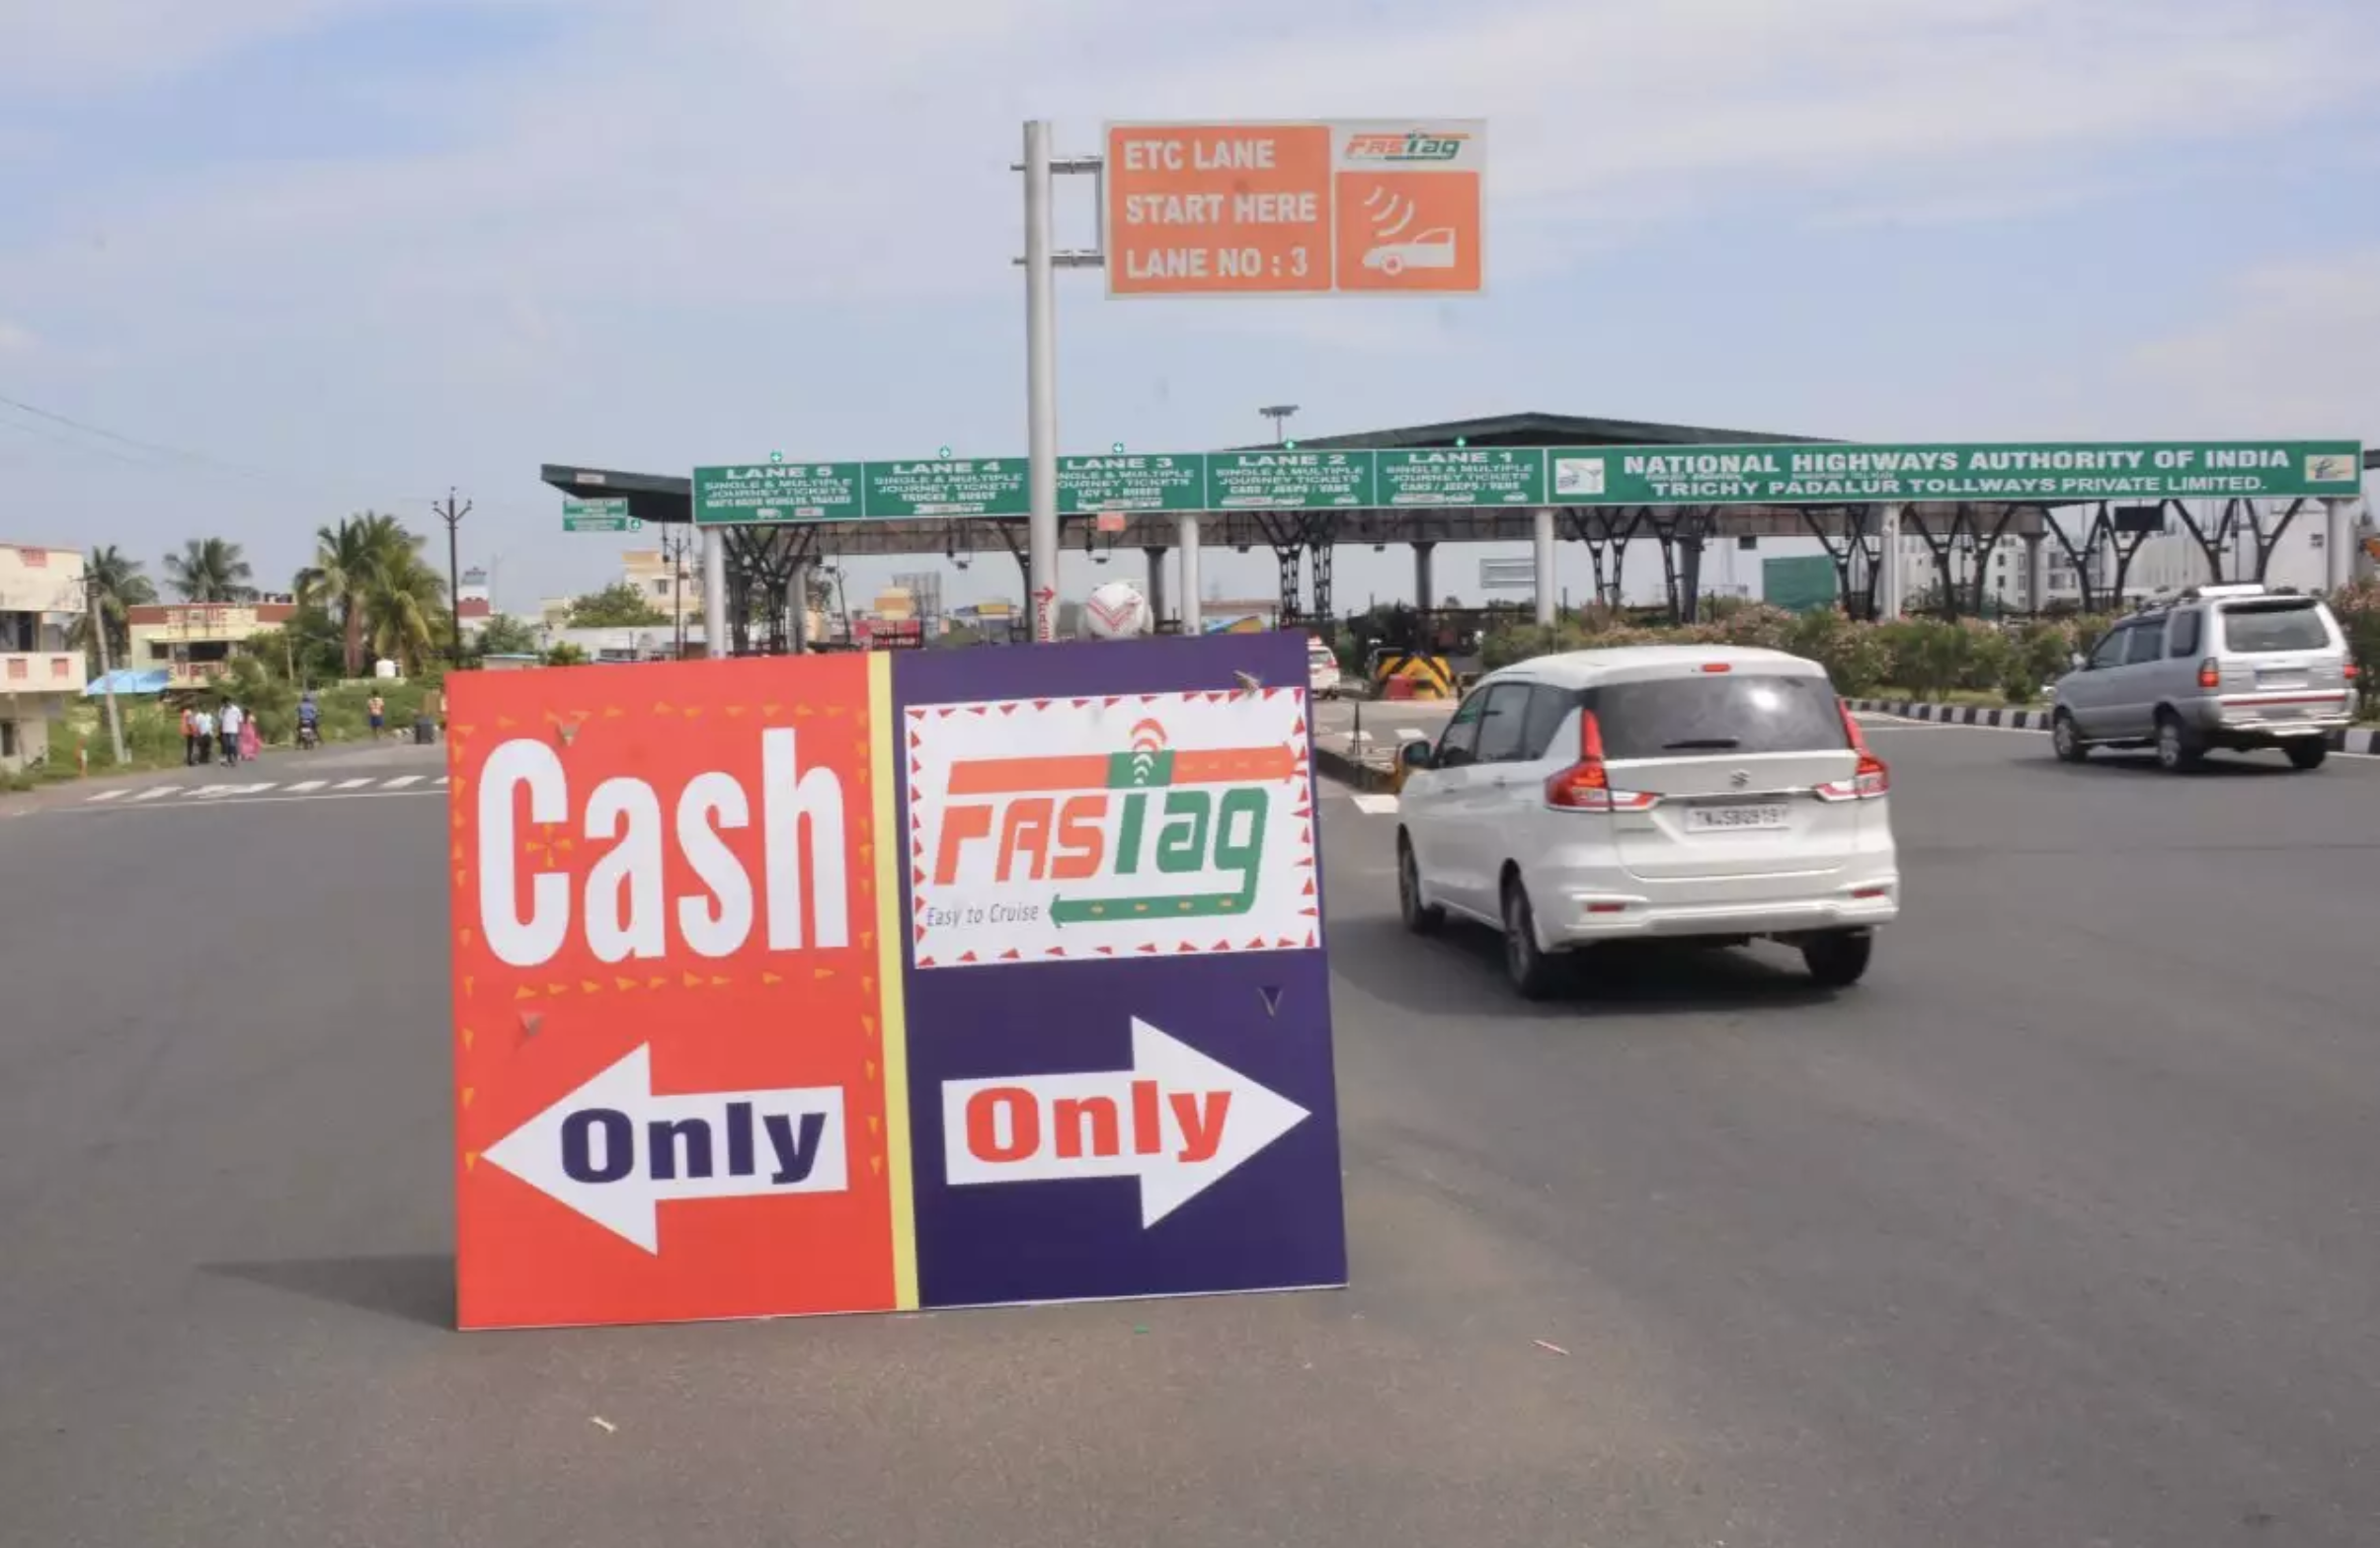 Fastag and cash lane on NHAI toll plaza